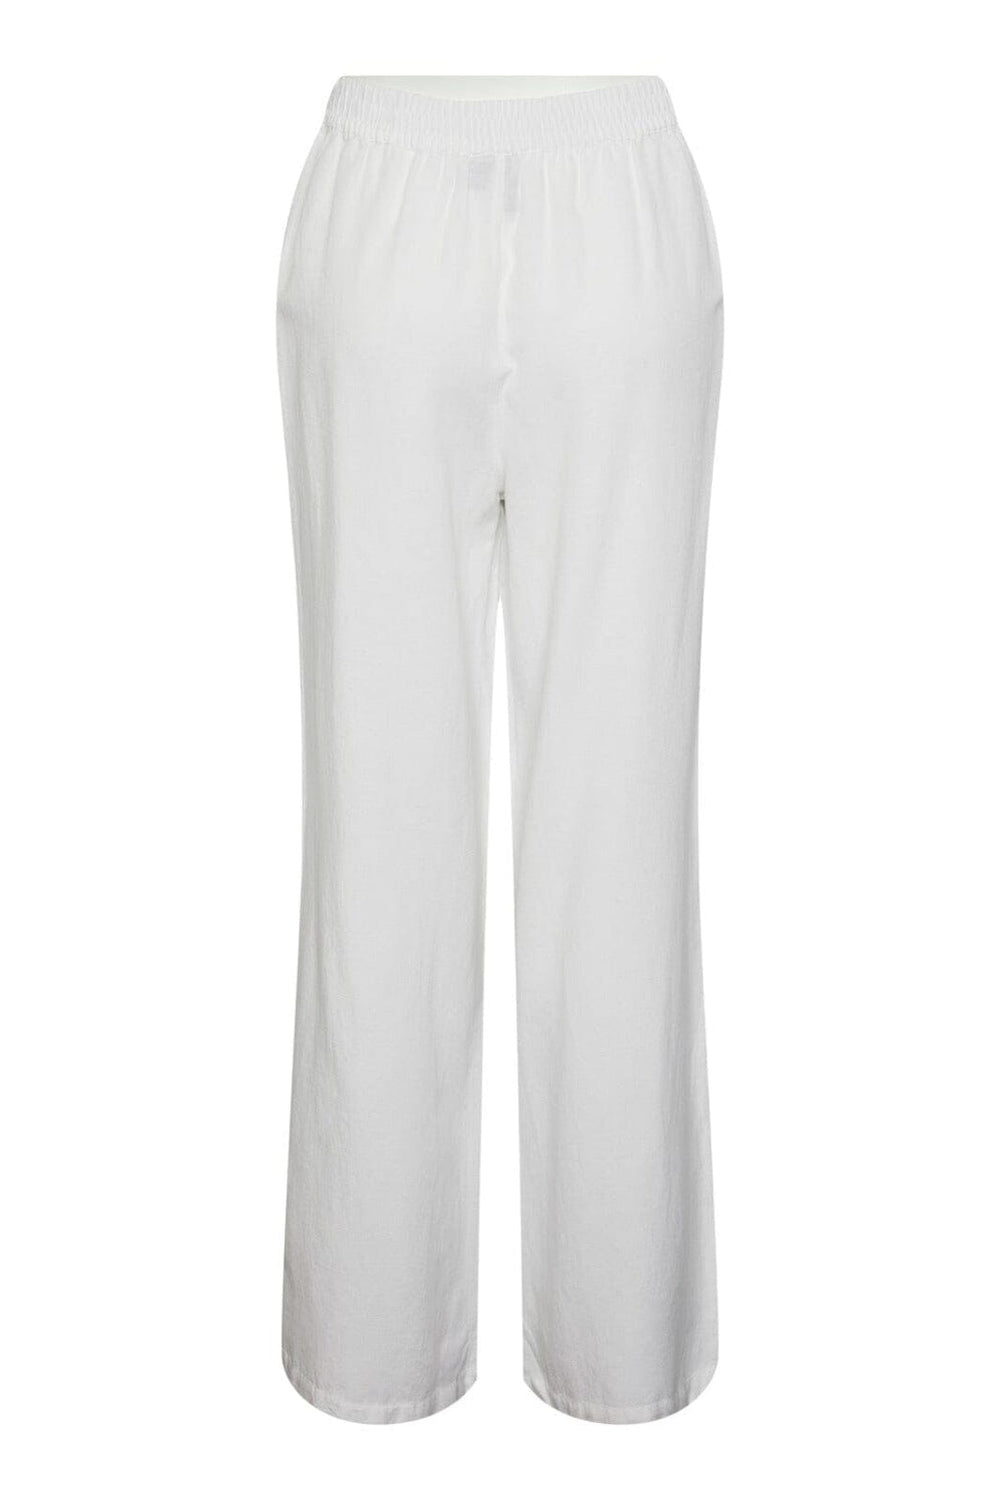 Pieces - Pcmilano Wide Pant - 4368661 Bright White Bukser 